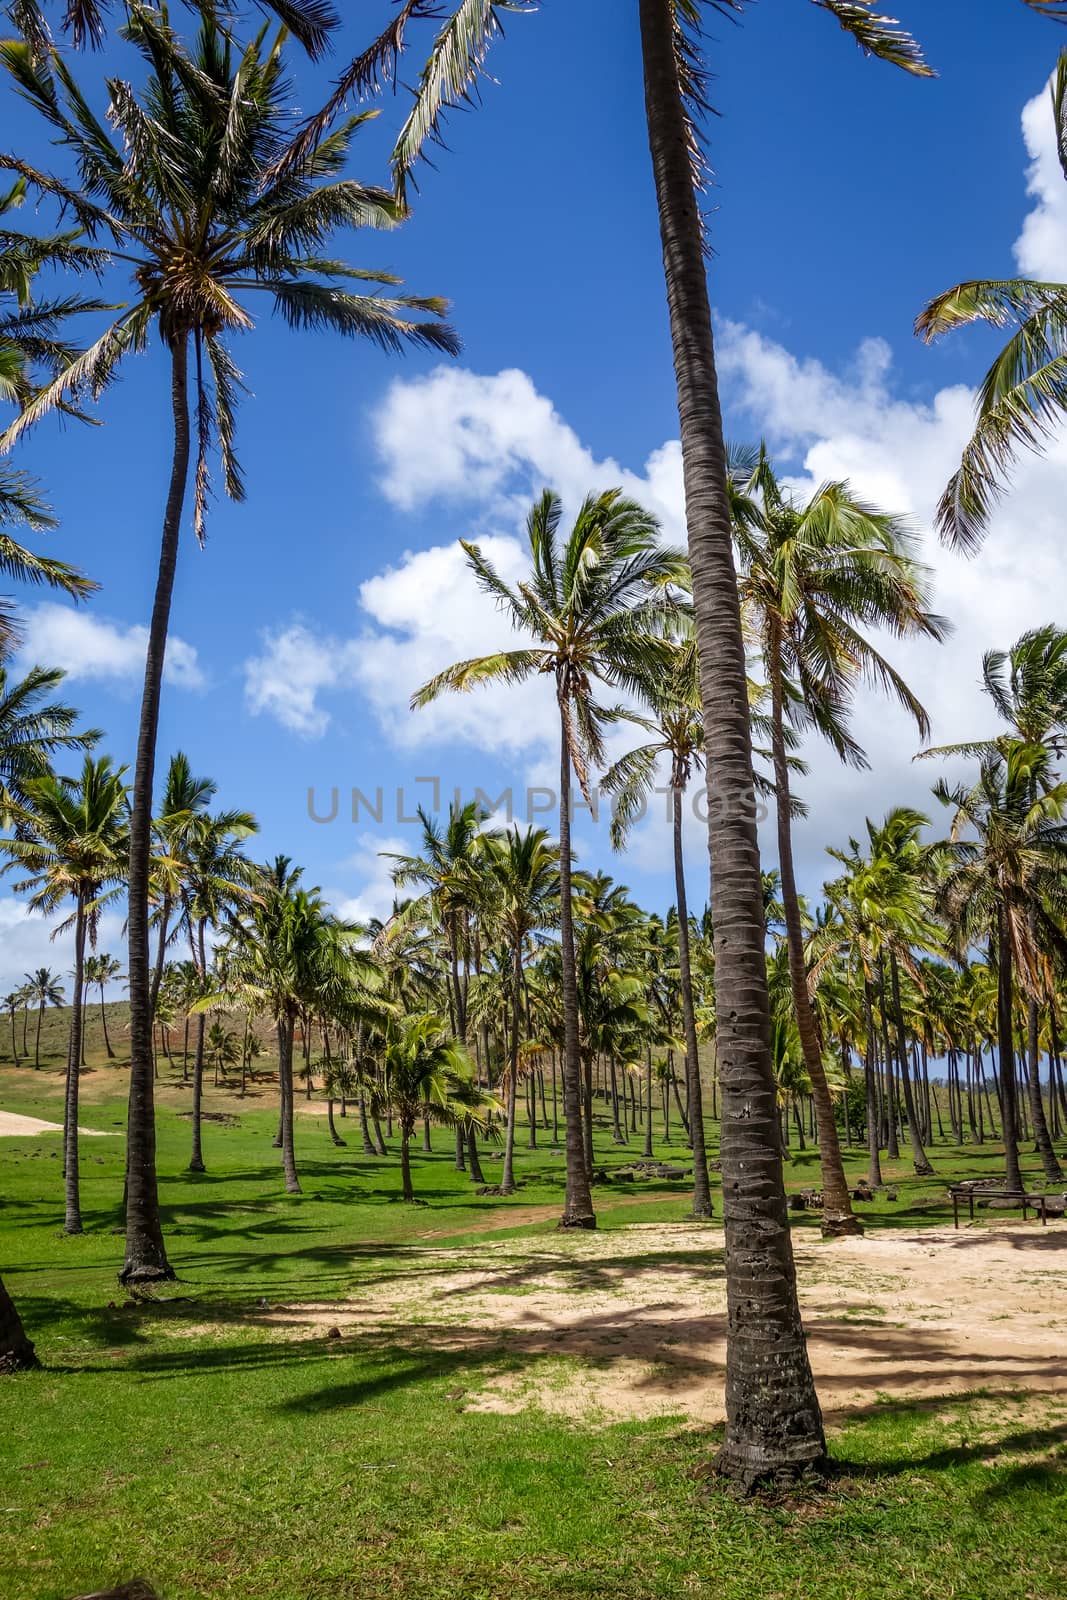 Palm trees on Anakena beach, easter island by daboost